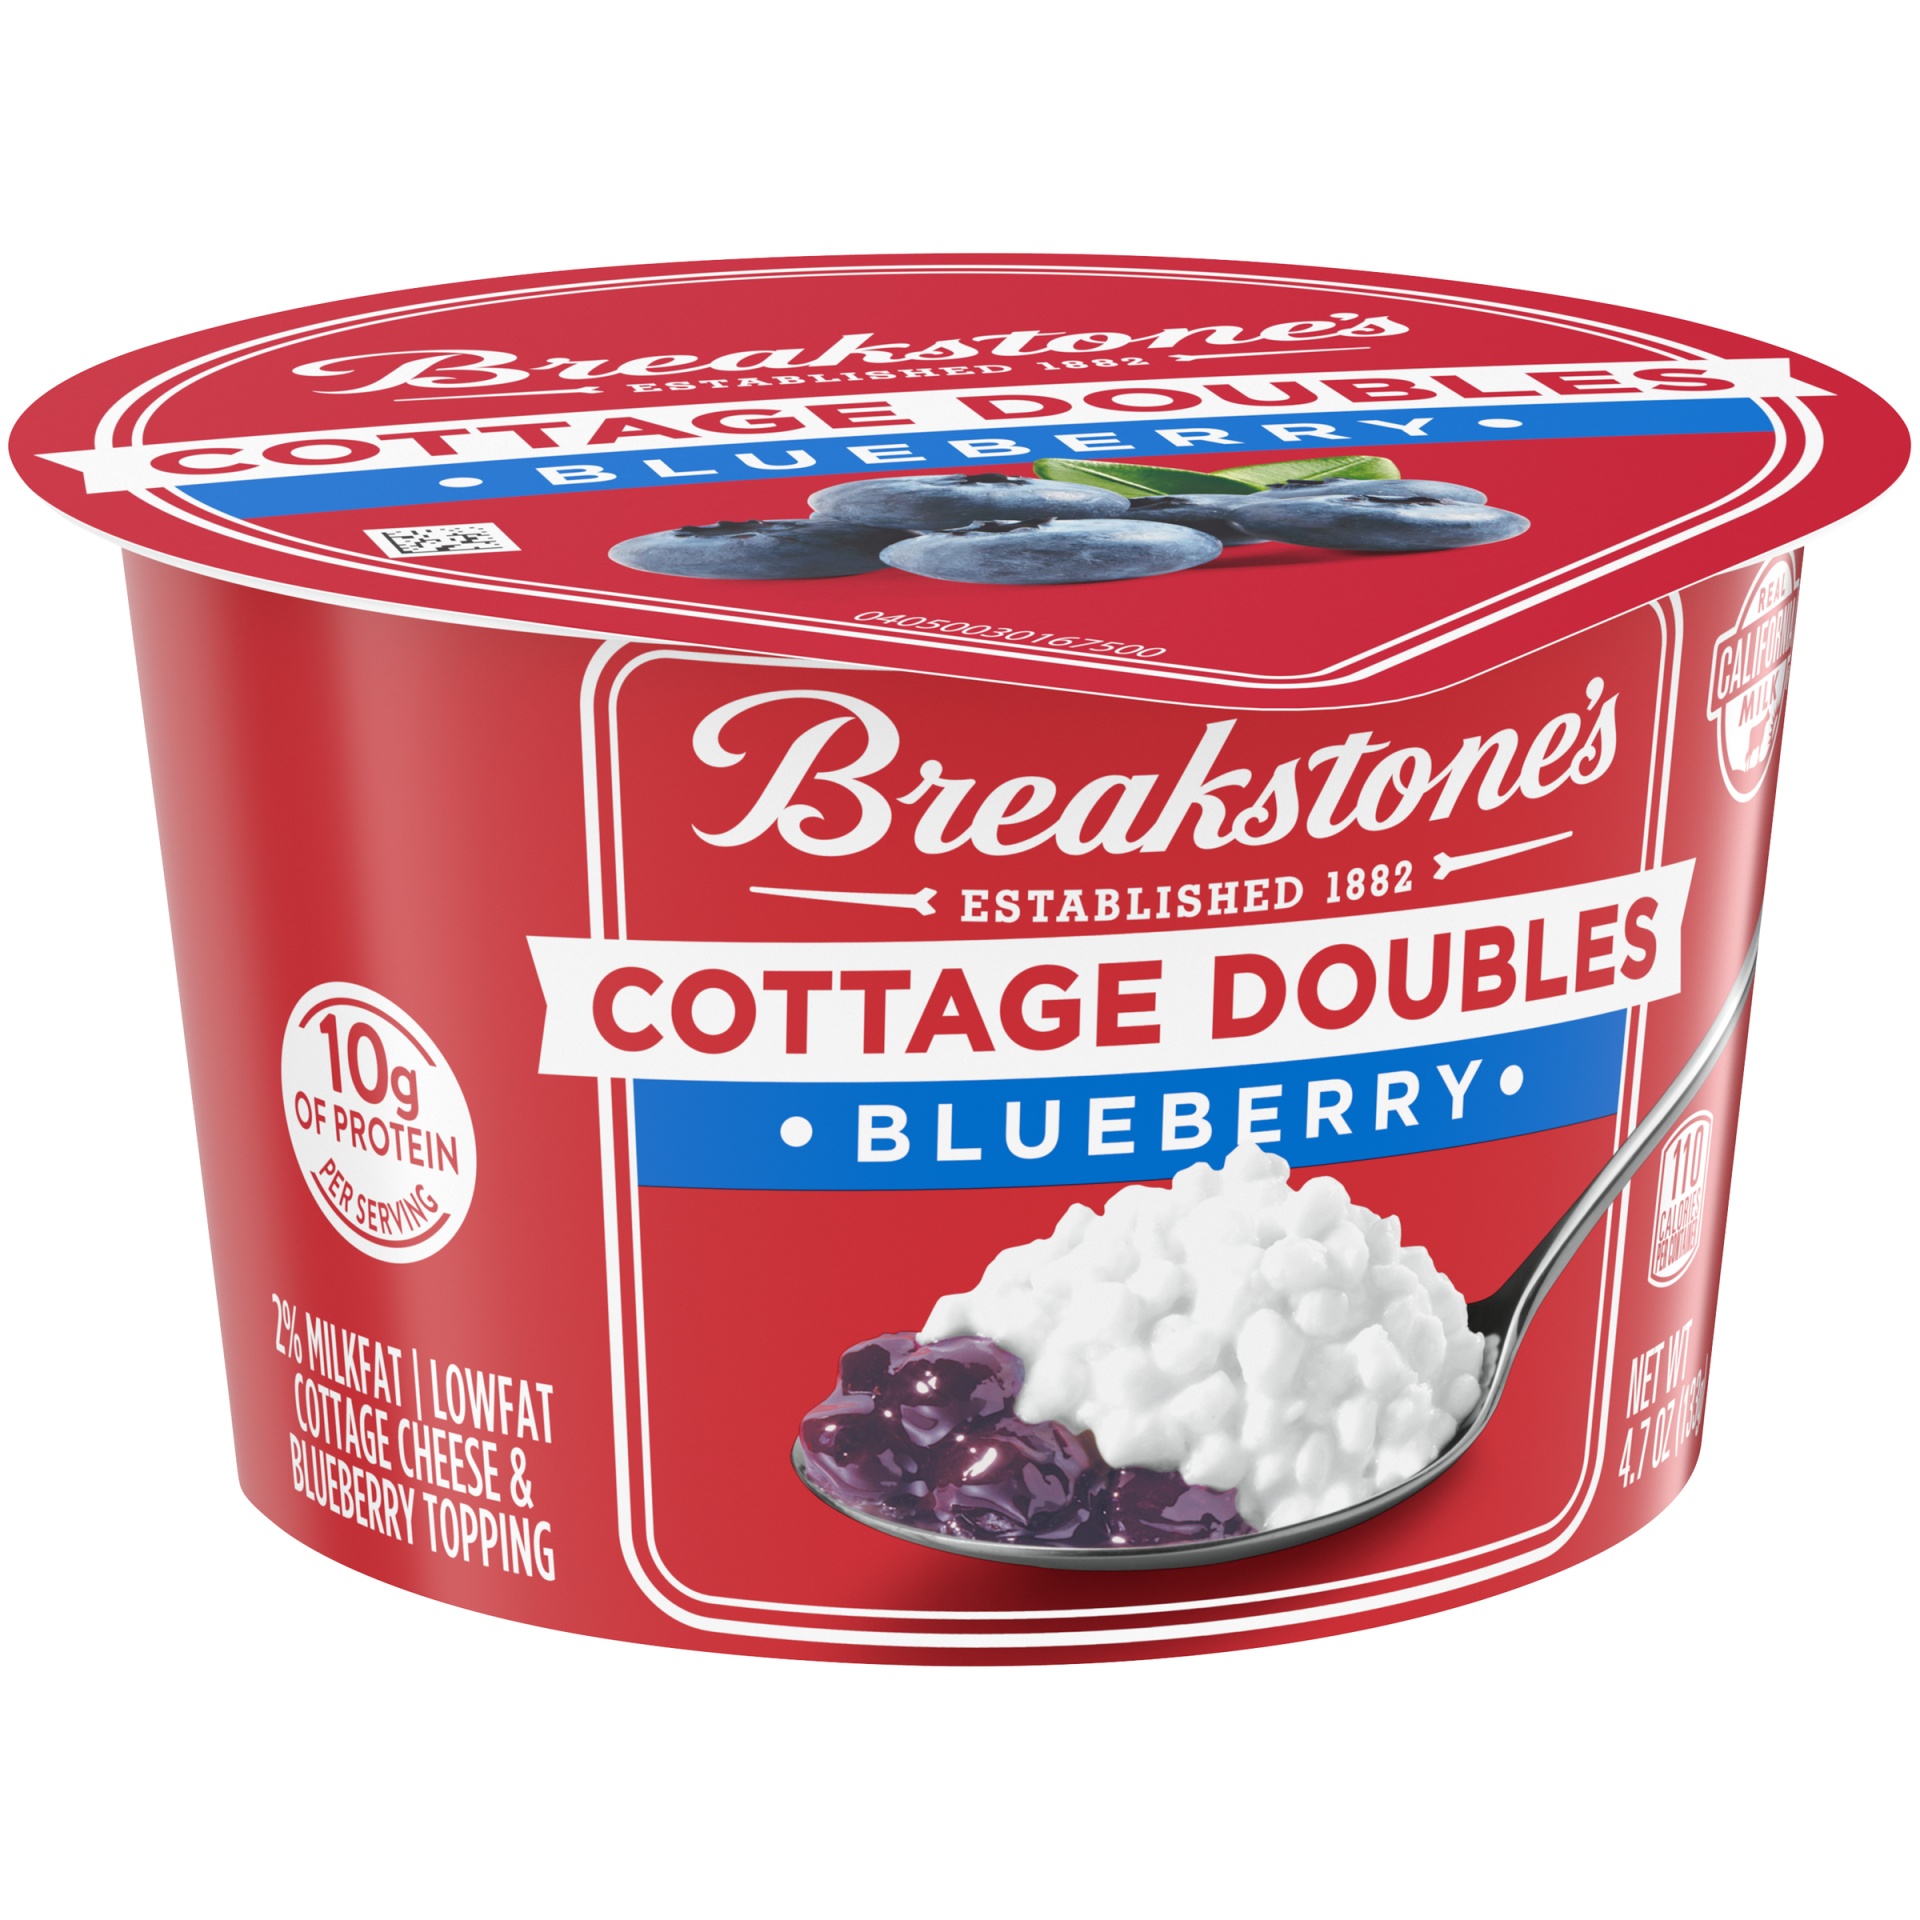 slide 2 of 6, Breakstone's Cottage Doubles Lowfat Cottage Cheese & Blueberry Topping with 2% Milkfat Cup, 4.7 oz